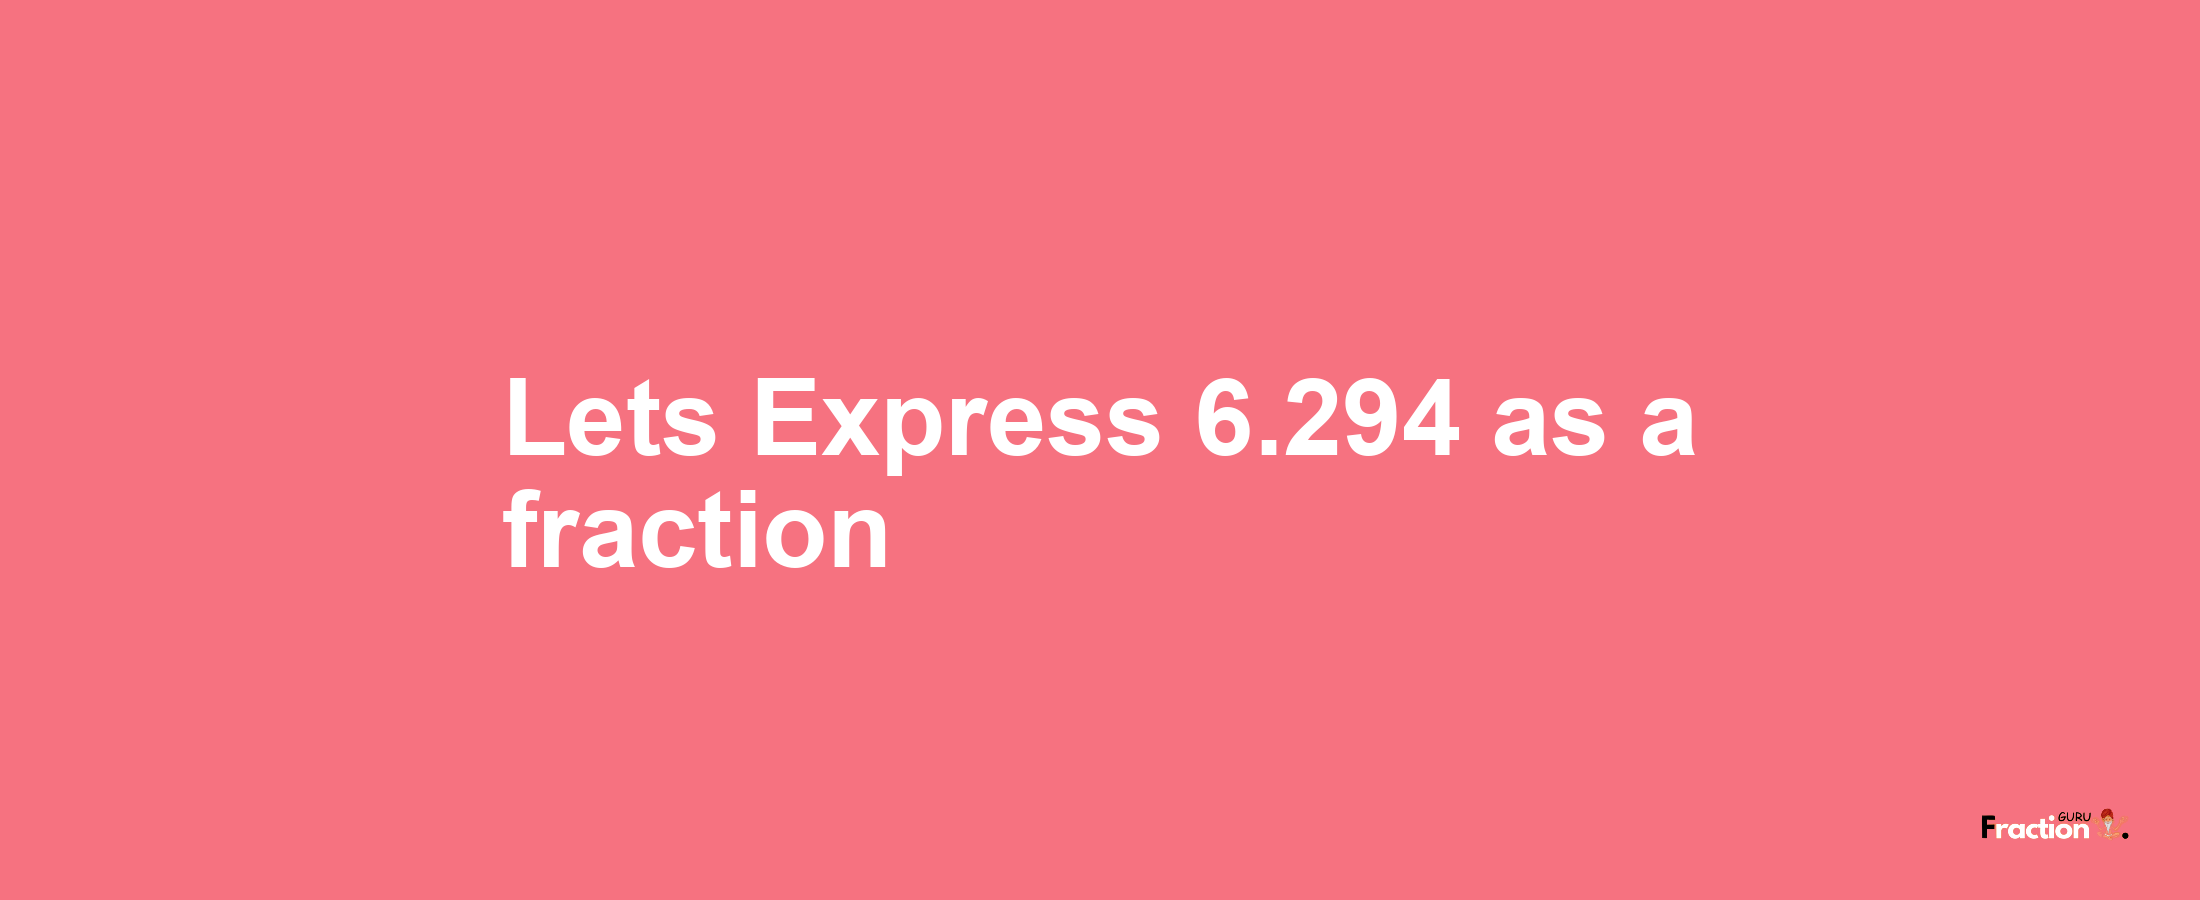 Lets Express 6.294 as afraction